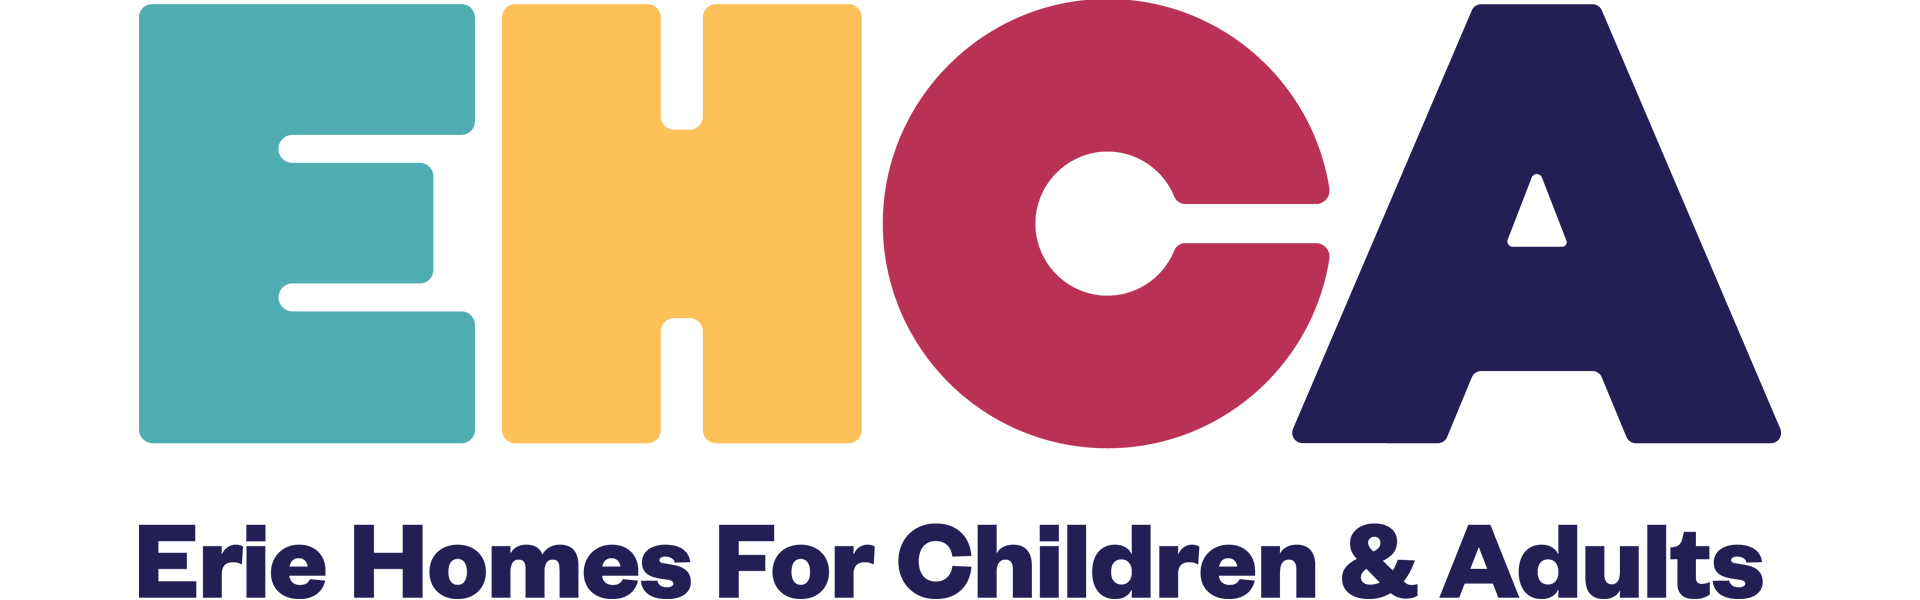 Erie Homes for Children & Adults